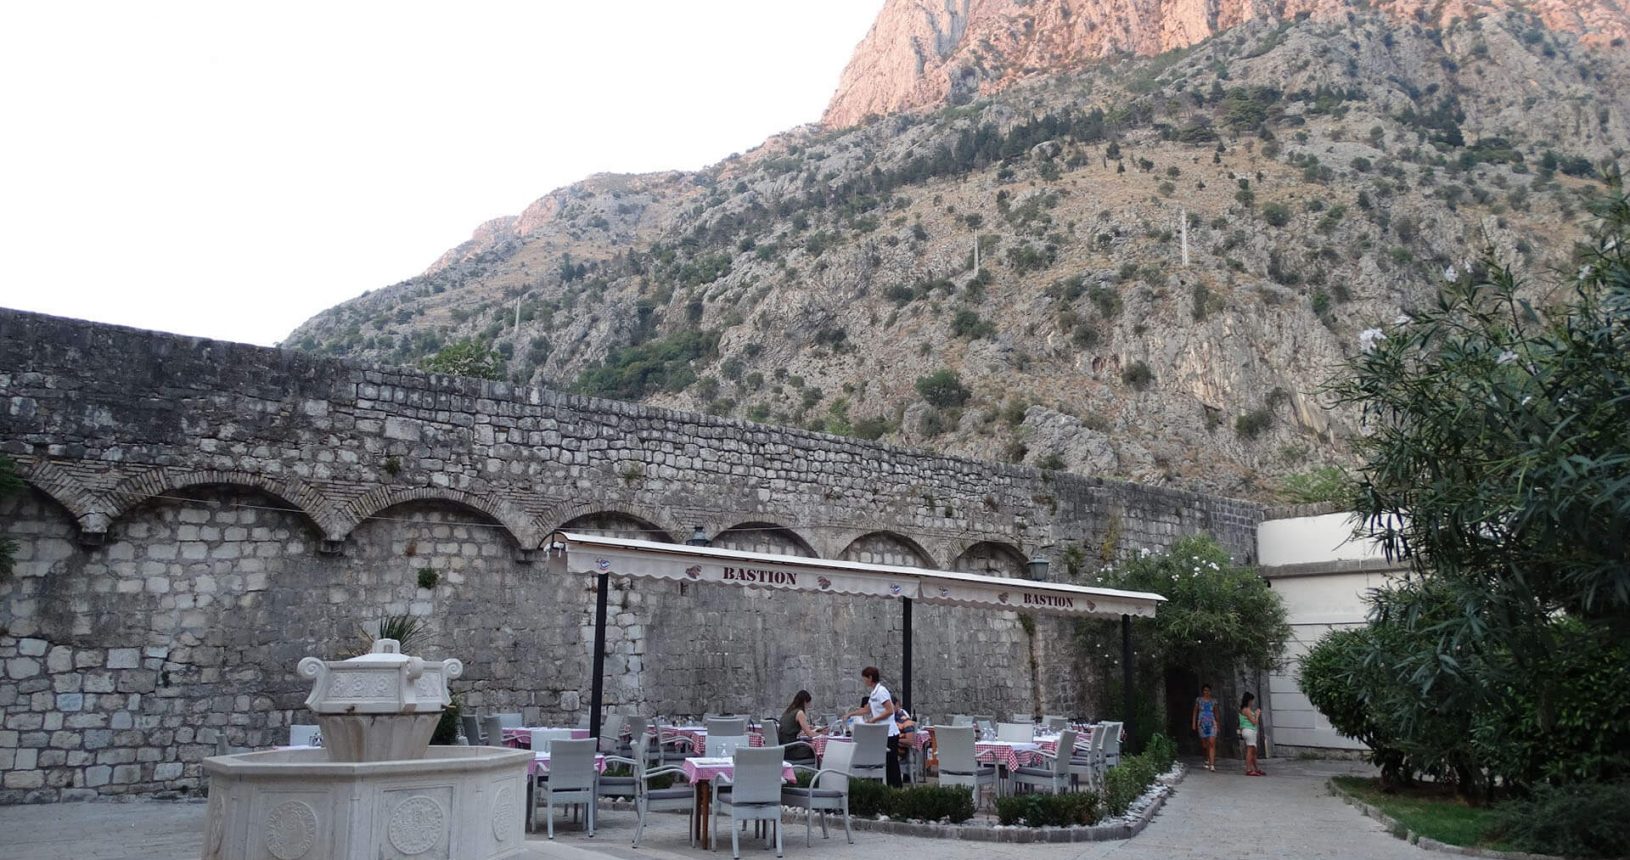 Lovely view inside Old Town of Kotor